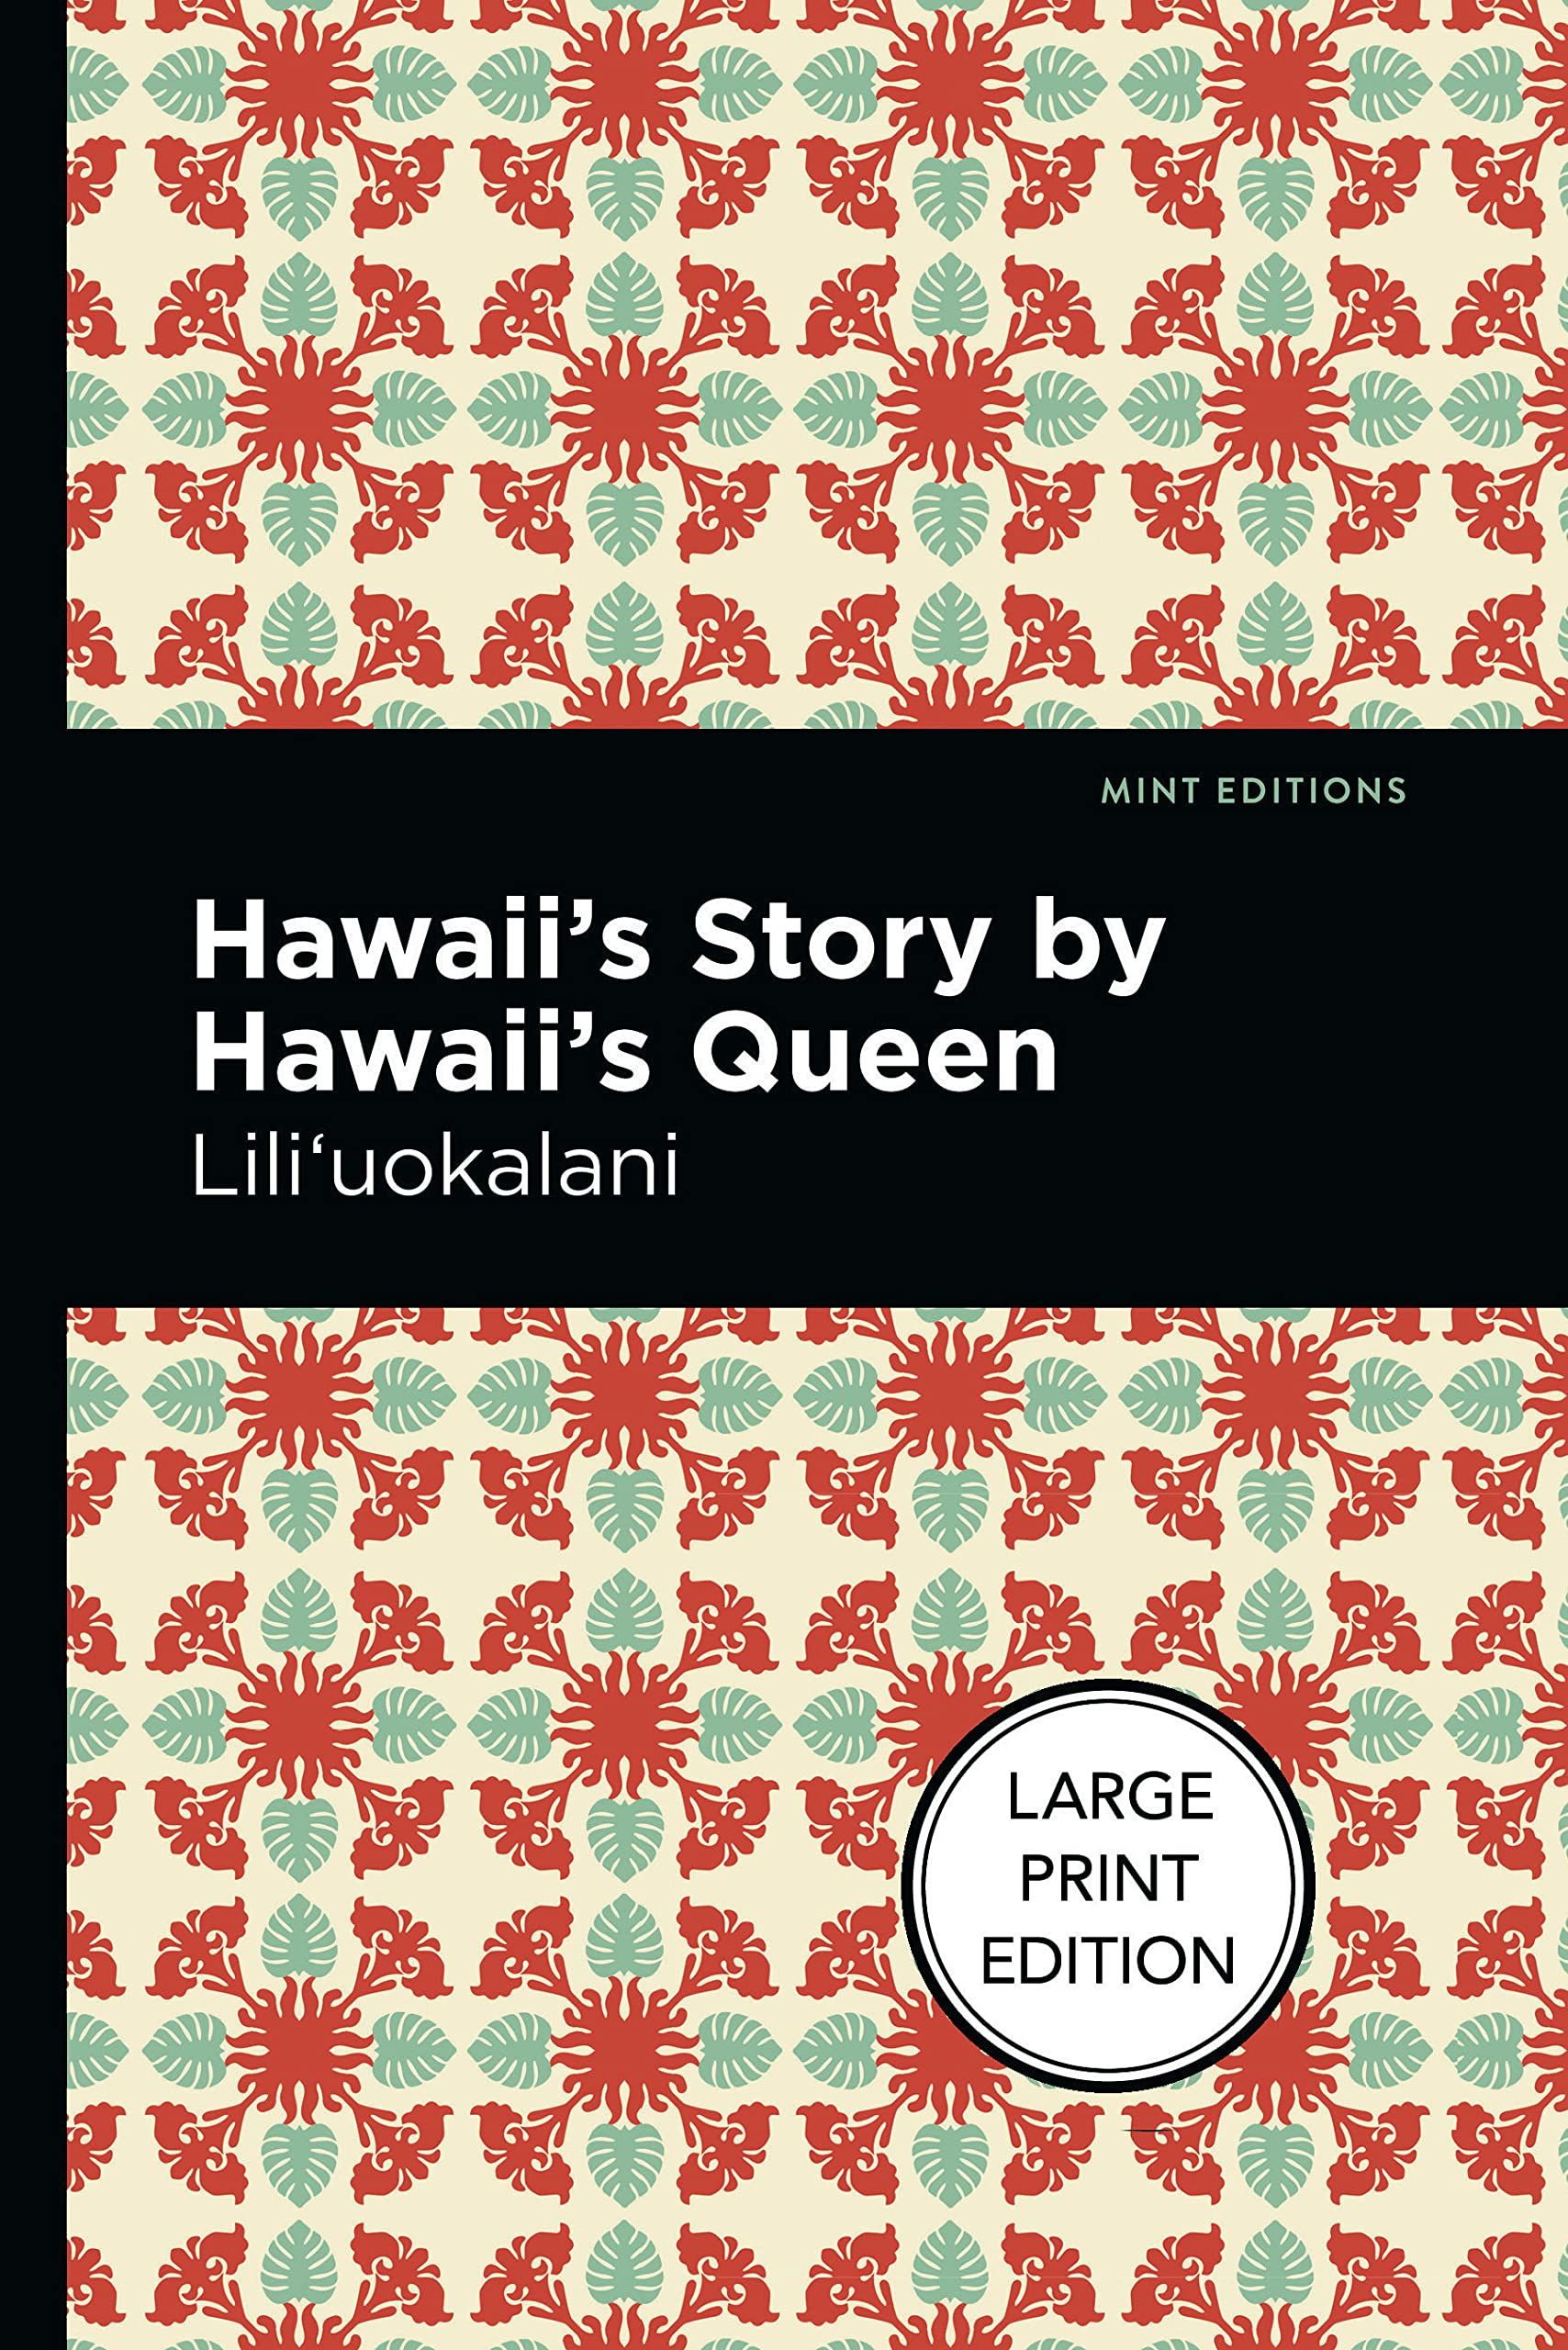 Hawaii's Story by Hawaii's Queen by Lili'uokalani cover